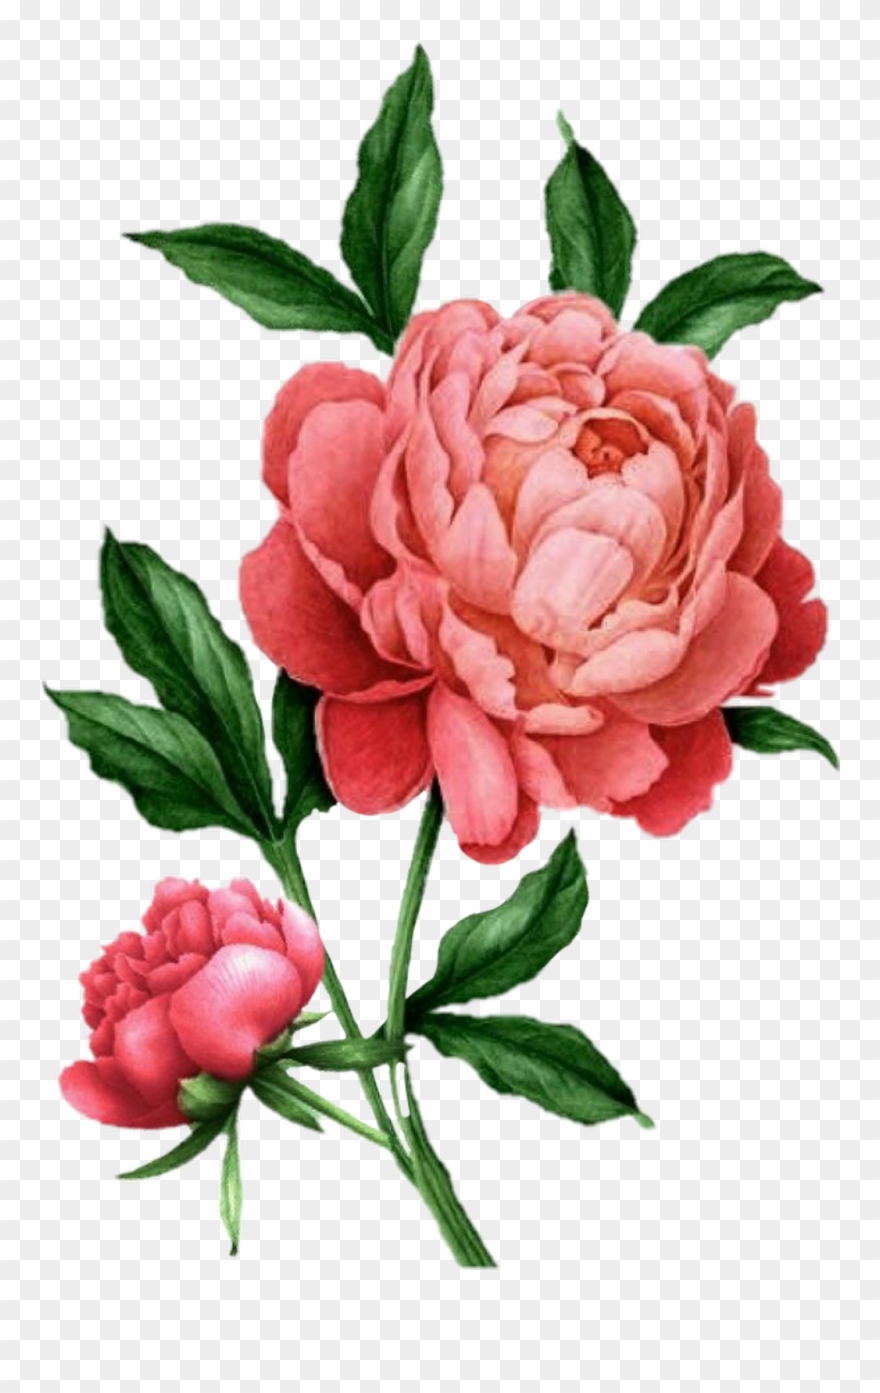 peonies clipart illustrated